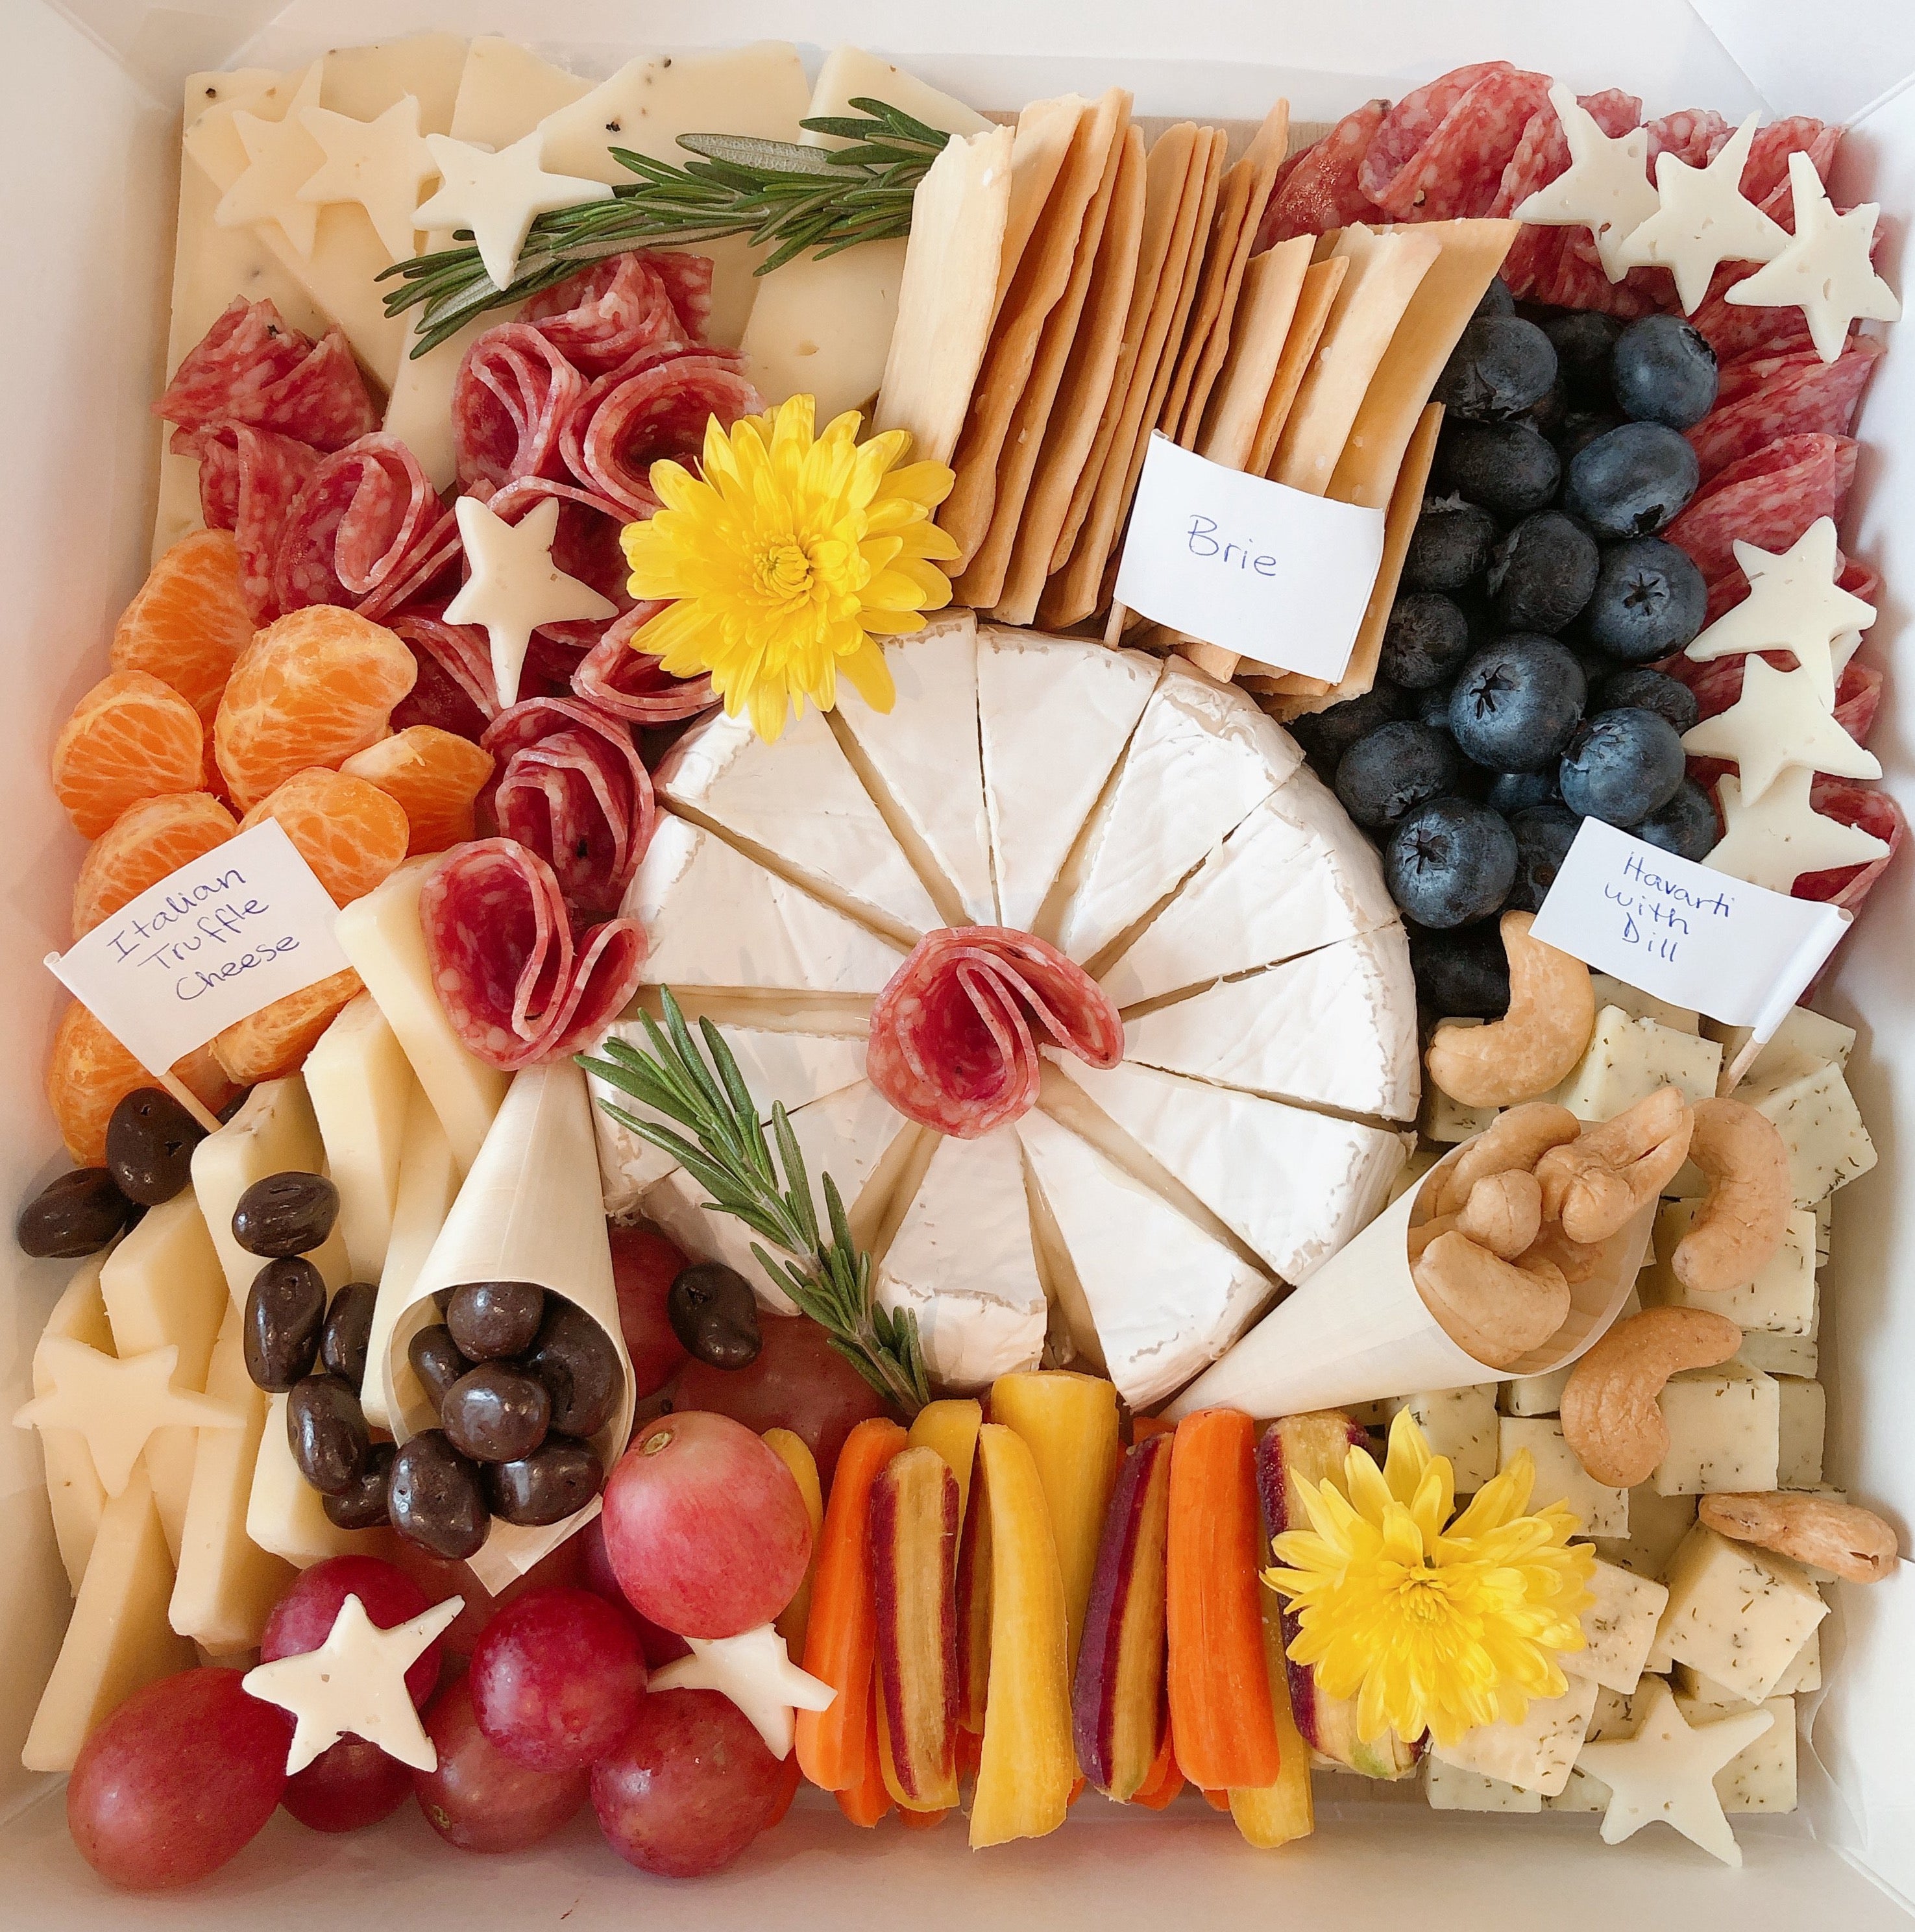 Small Cheeseboard For 5-7 People